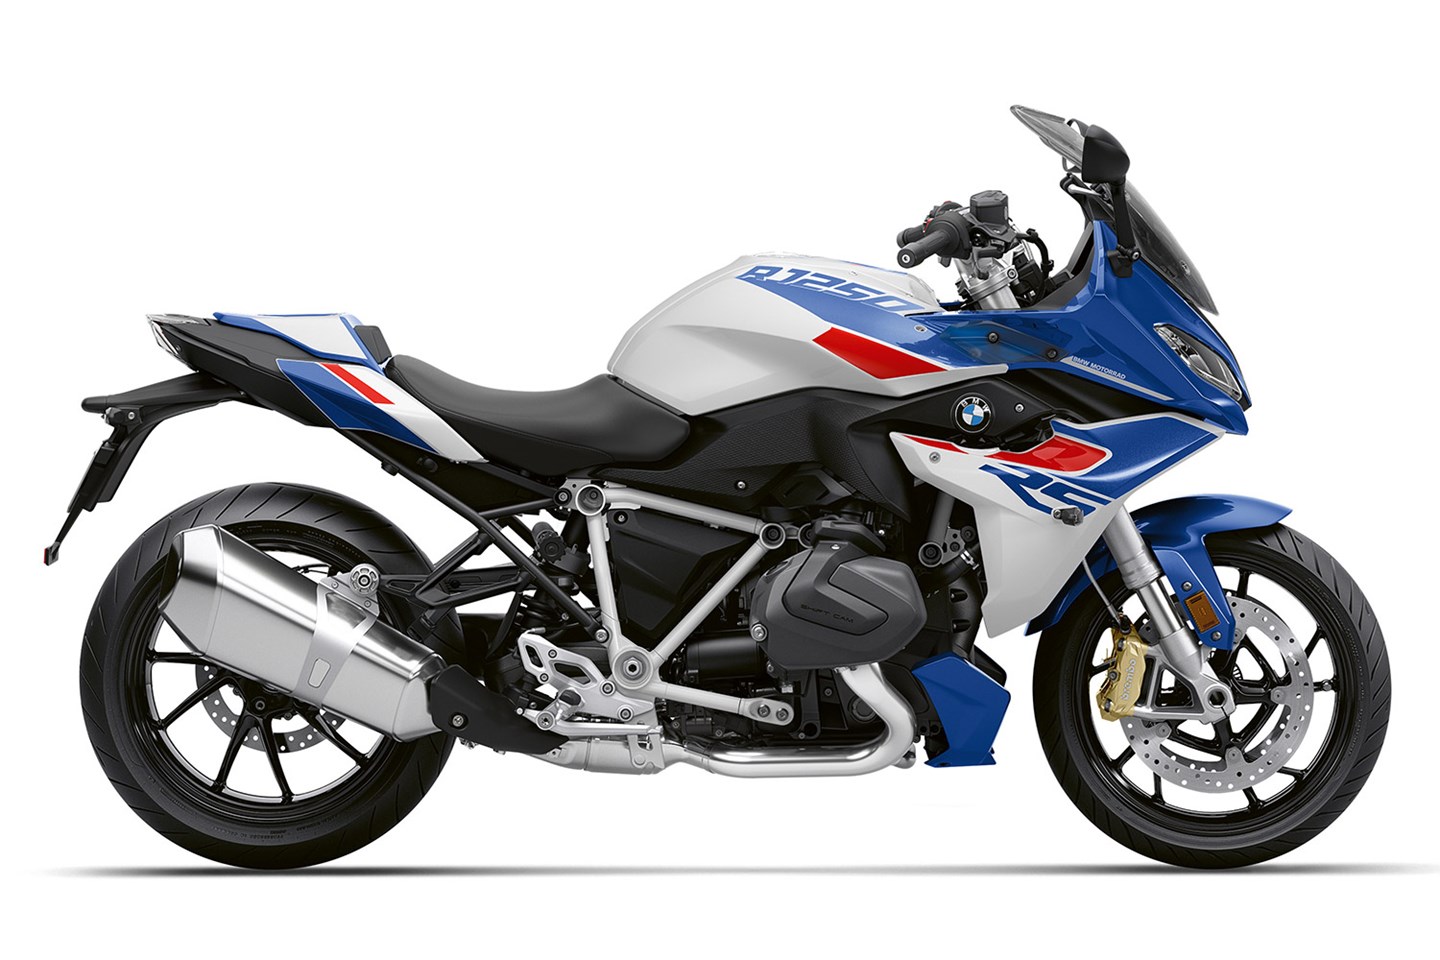 2019 BMW R1250 GS India launch price Rs 16.85 L - 4 variants on offer